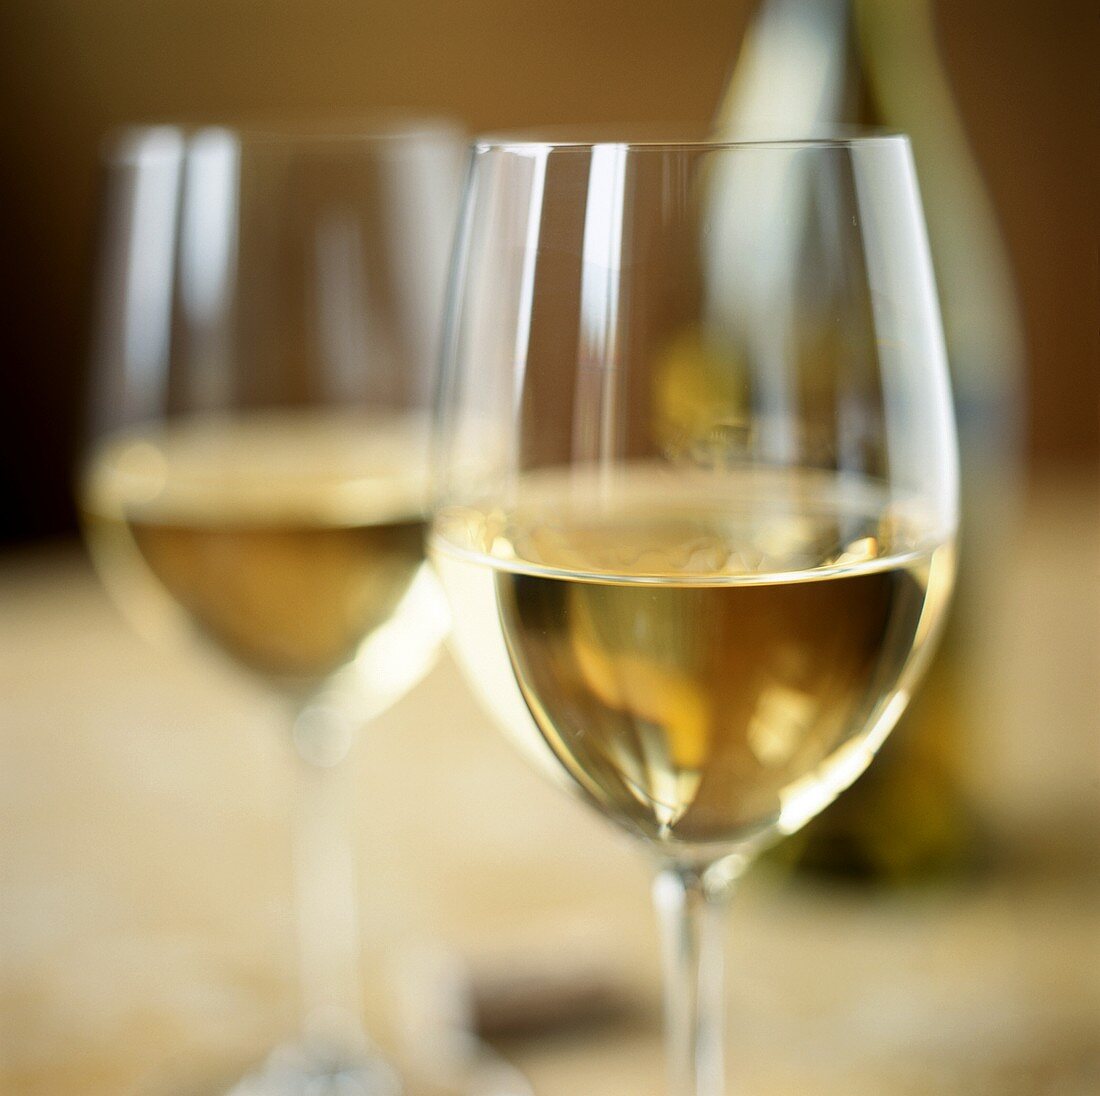 Two white wine glasses in front of bottle in background